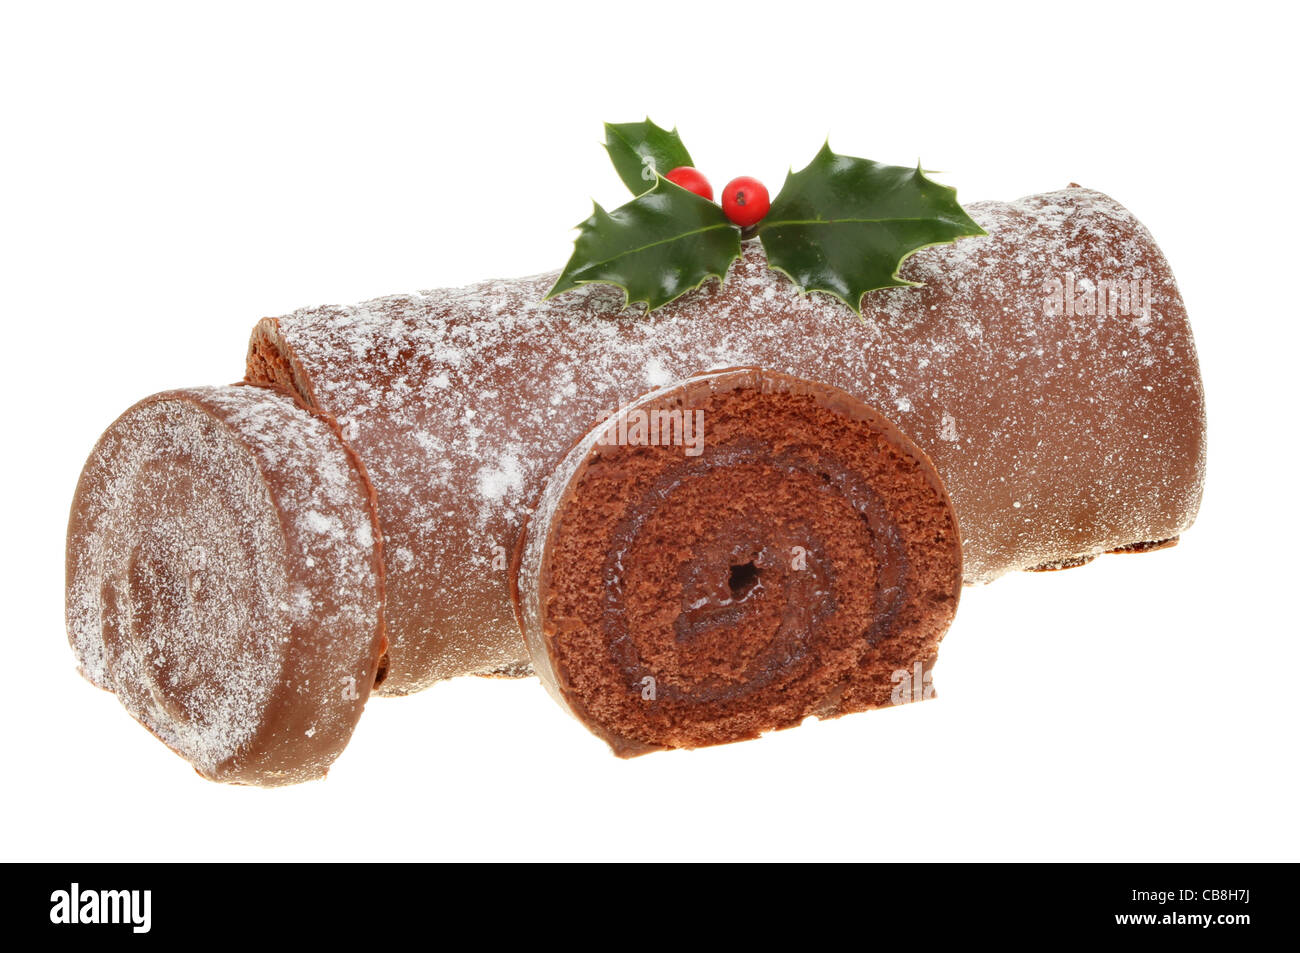 Closeup of a sliced Christmas chocolate log decorated with fresh holly isolated on white Stock Photo